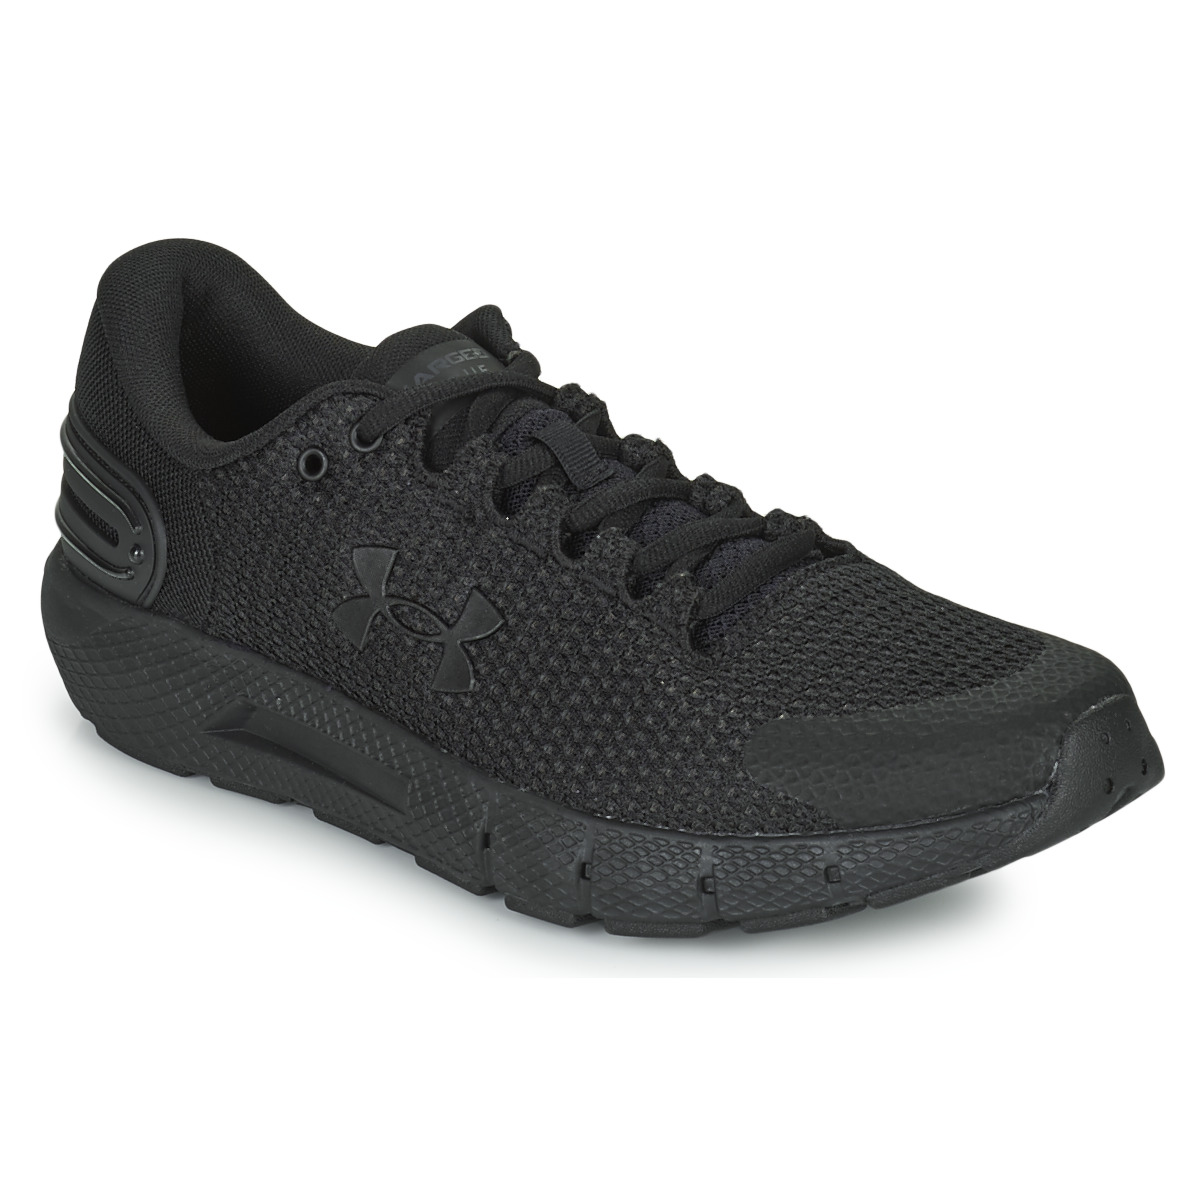 Under Armour Charged Rogue 2.5 Black